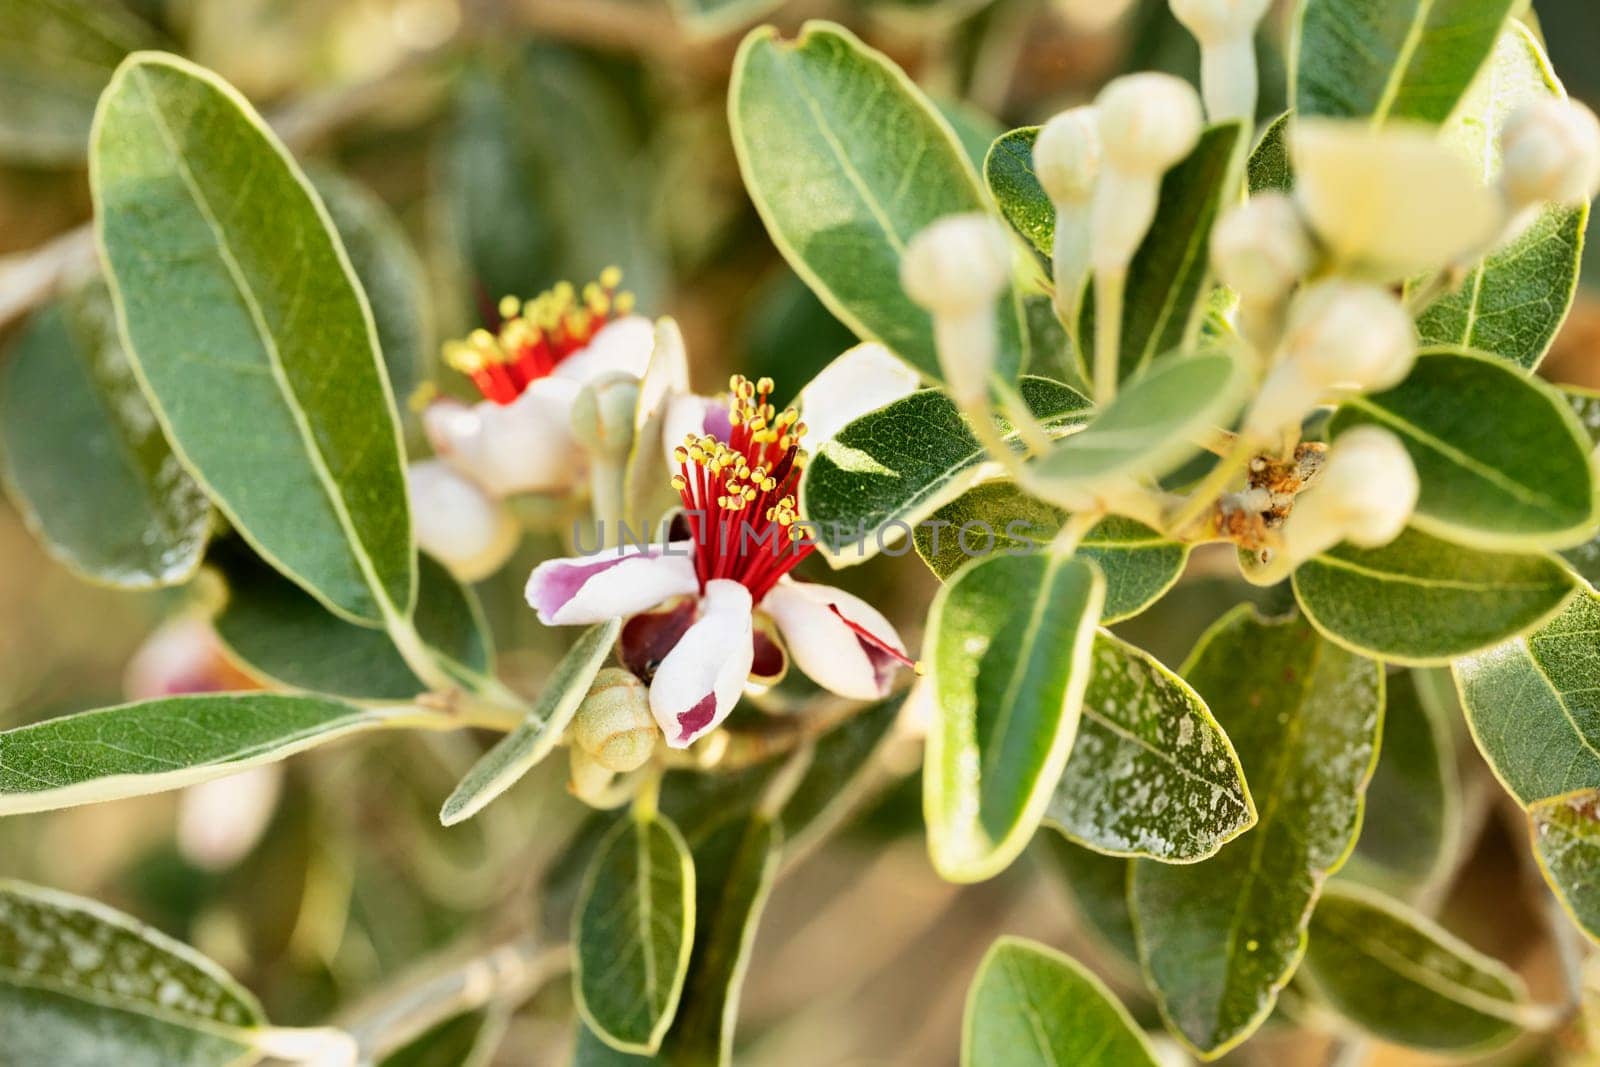 Flowering plant of feijoa sellowiana -pineapple guava - myrtle family ,ornamental tree